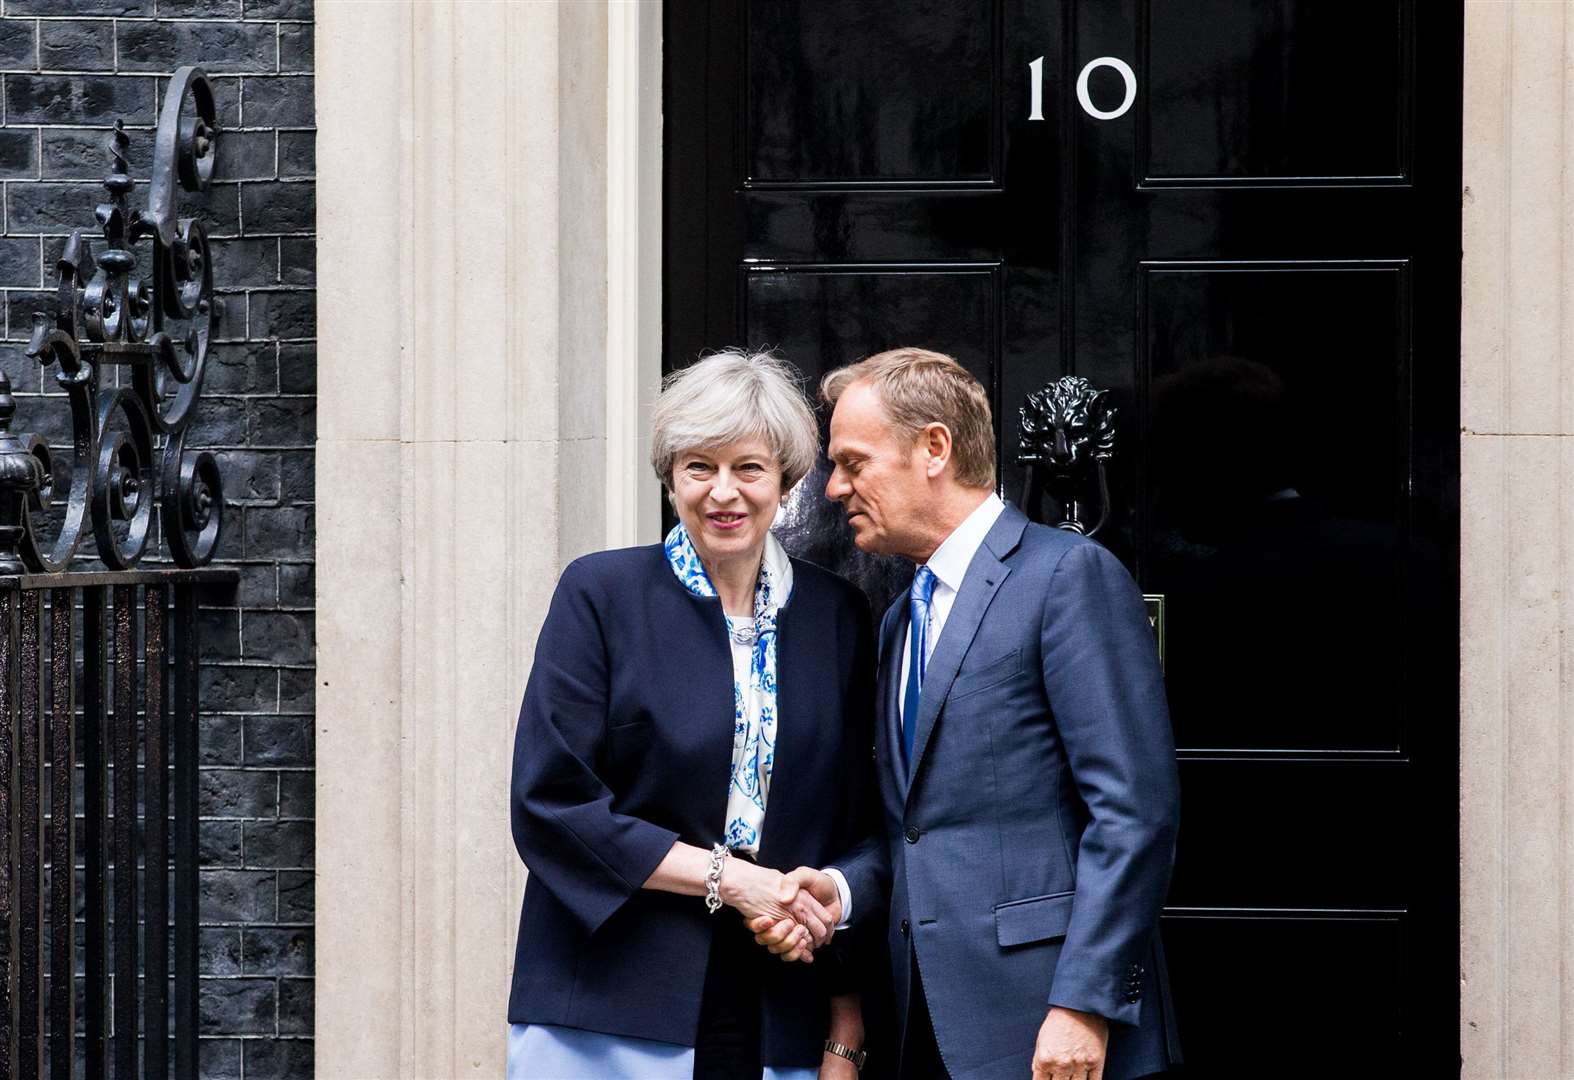 Prime Minister Theresa May meets Donald Tusk, President of the European Council, at Downing Street in 2017